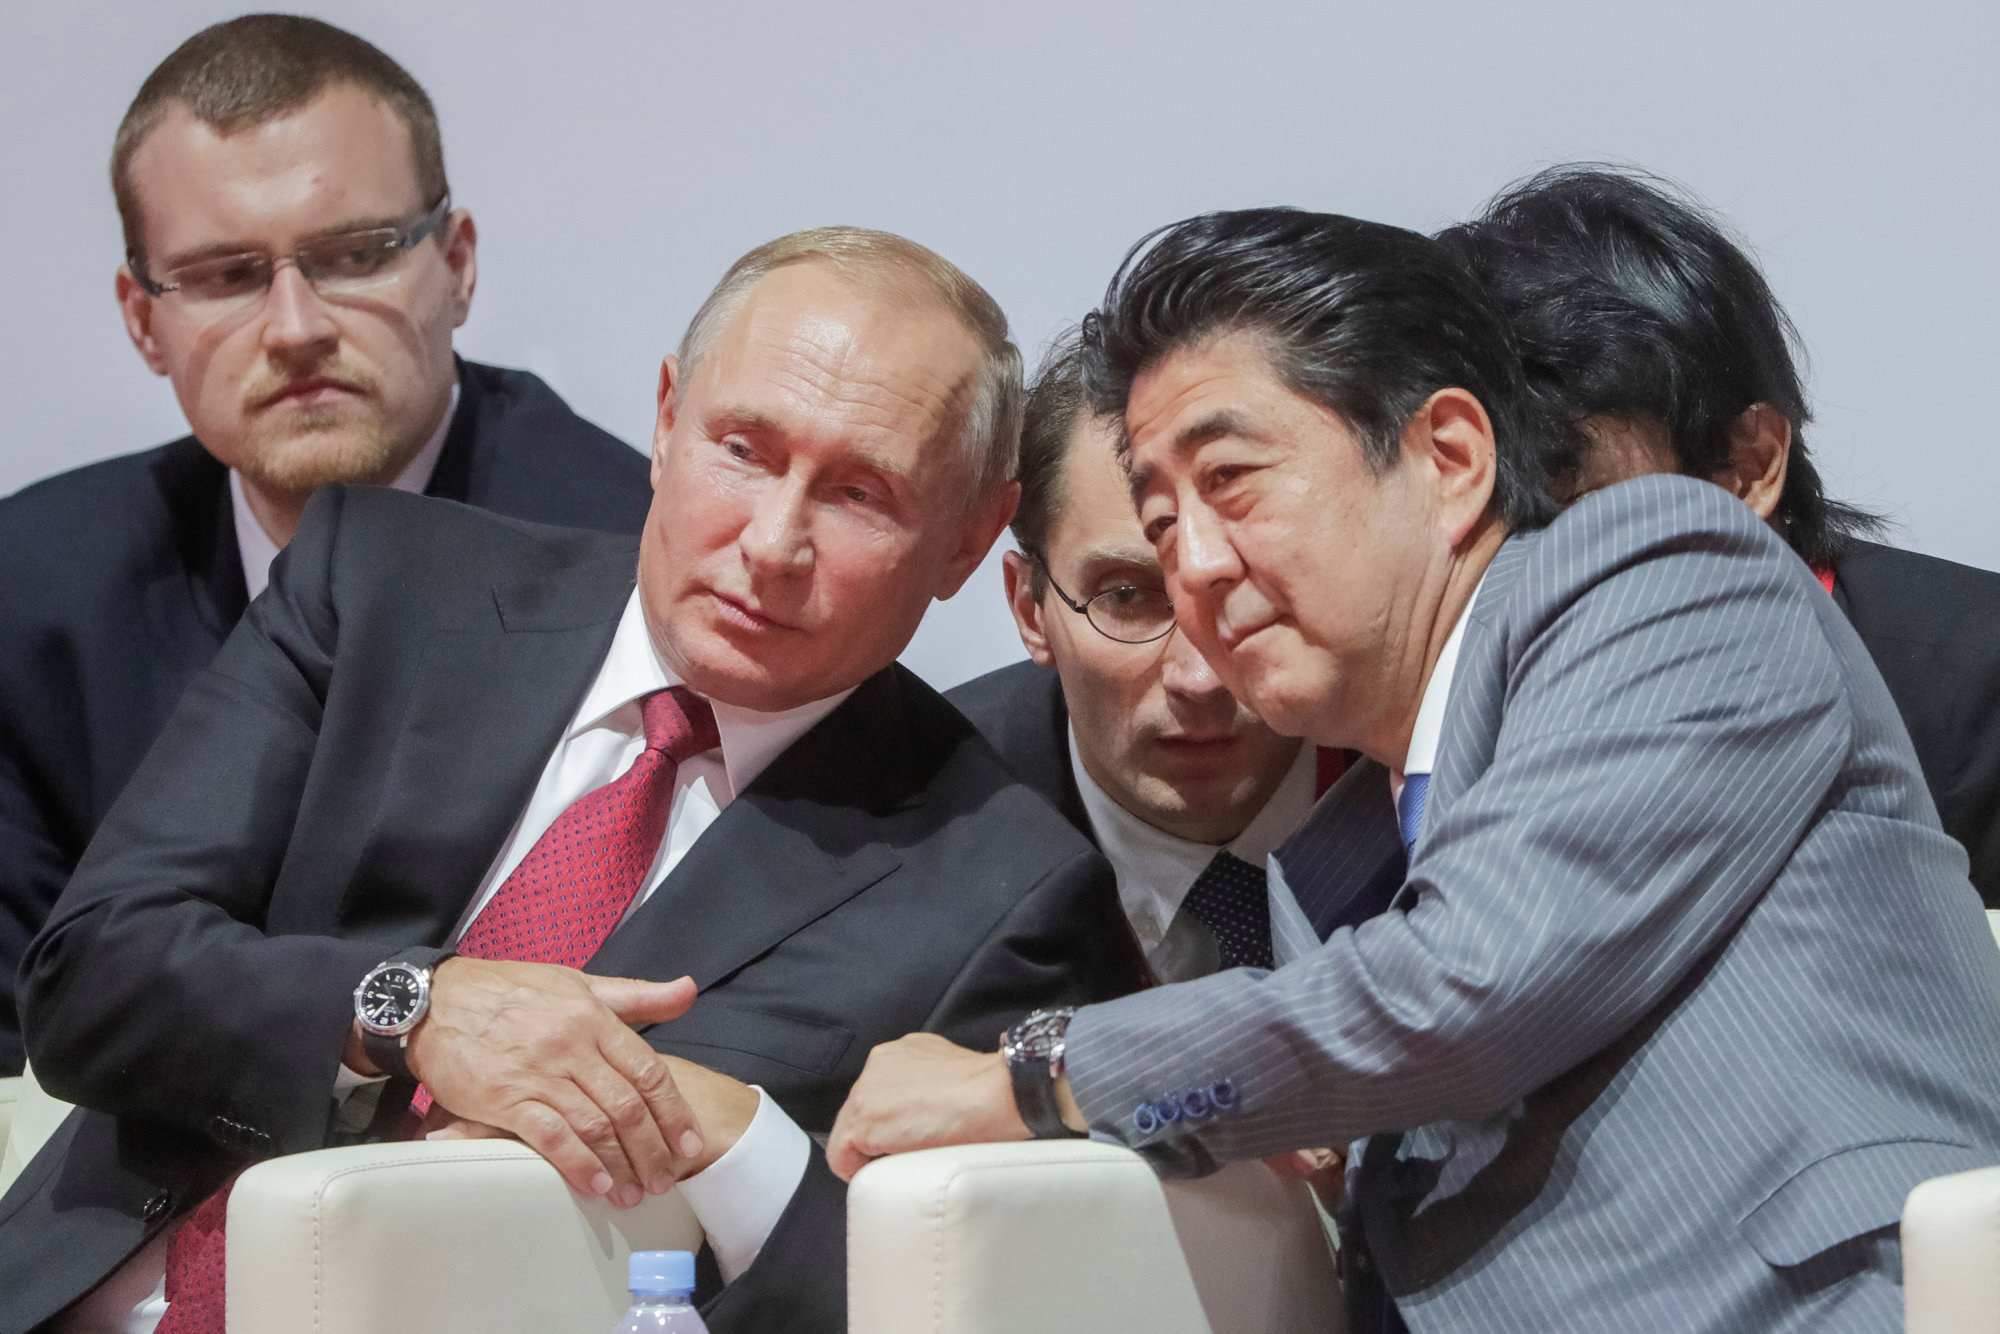 Russian President Vladimir Putin and Prime Minister Shinzo Abe watch an international judo tournament on the sidelines of the Eastern Economic Forum in Vladivostok, Russia, in September. The two are trying to lay the groundwork for reaching an agreement this year on a long-standing territorial dispute. | REUTERS